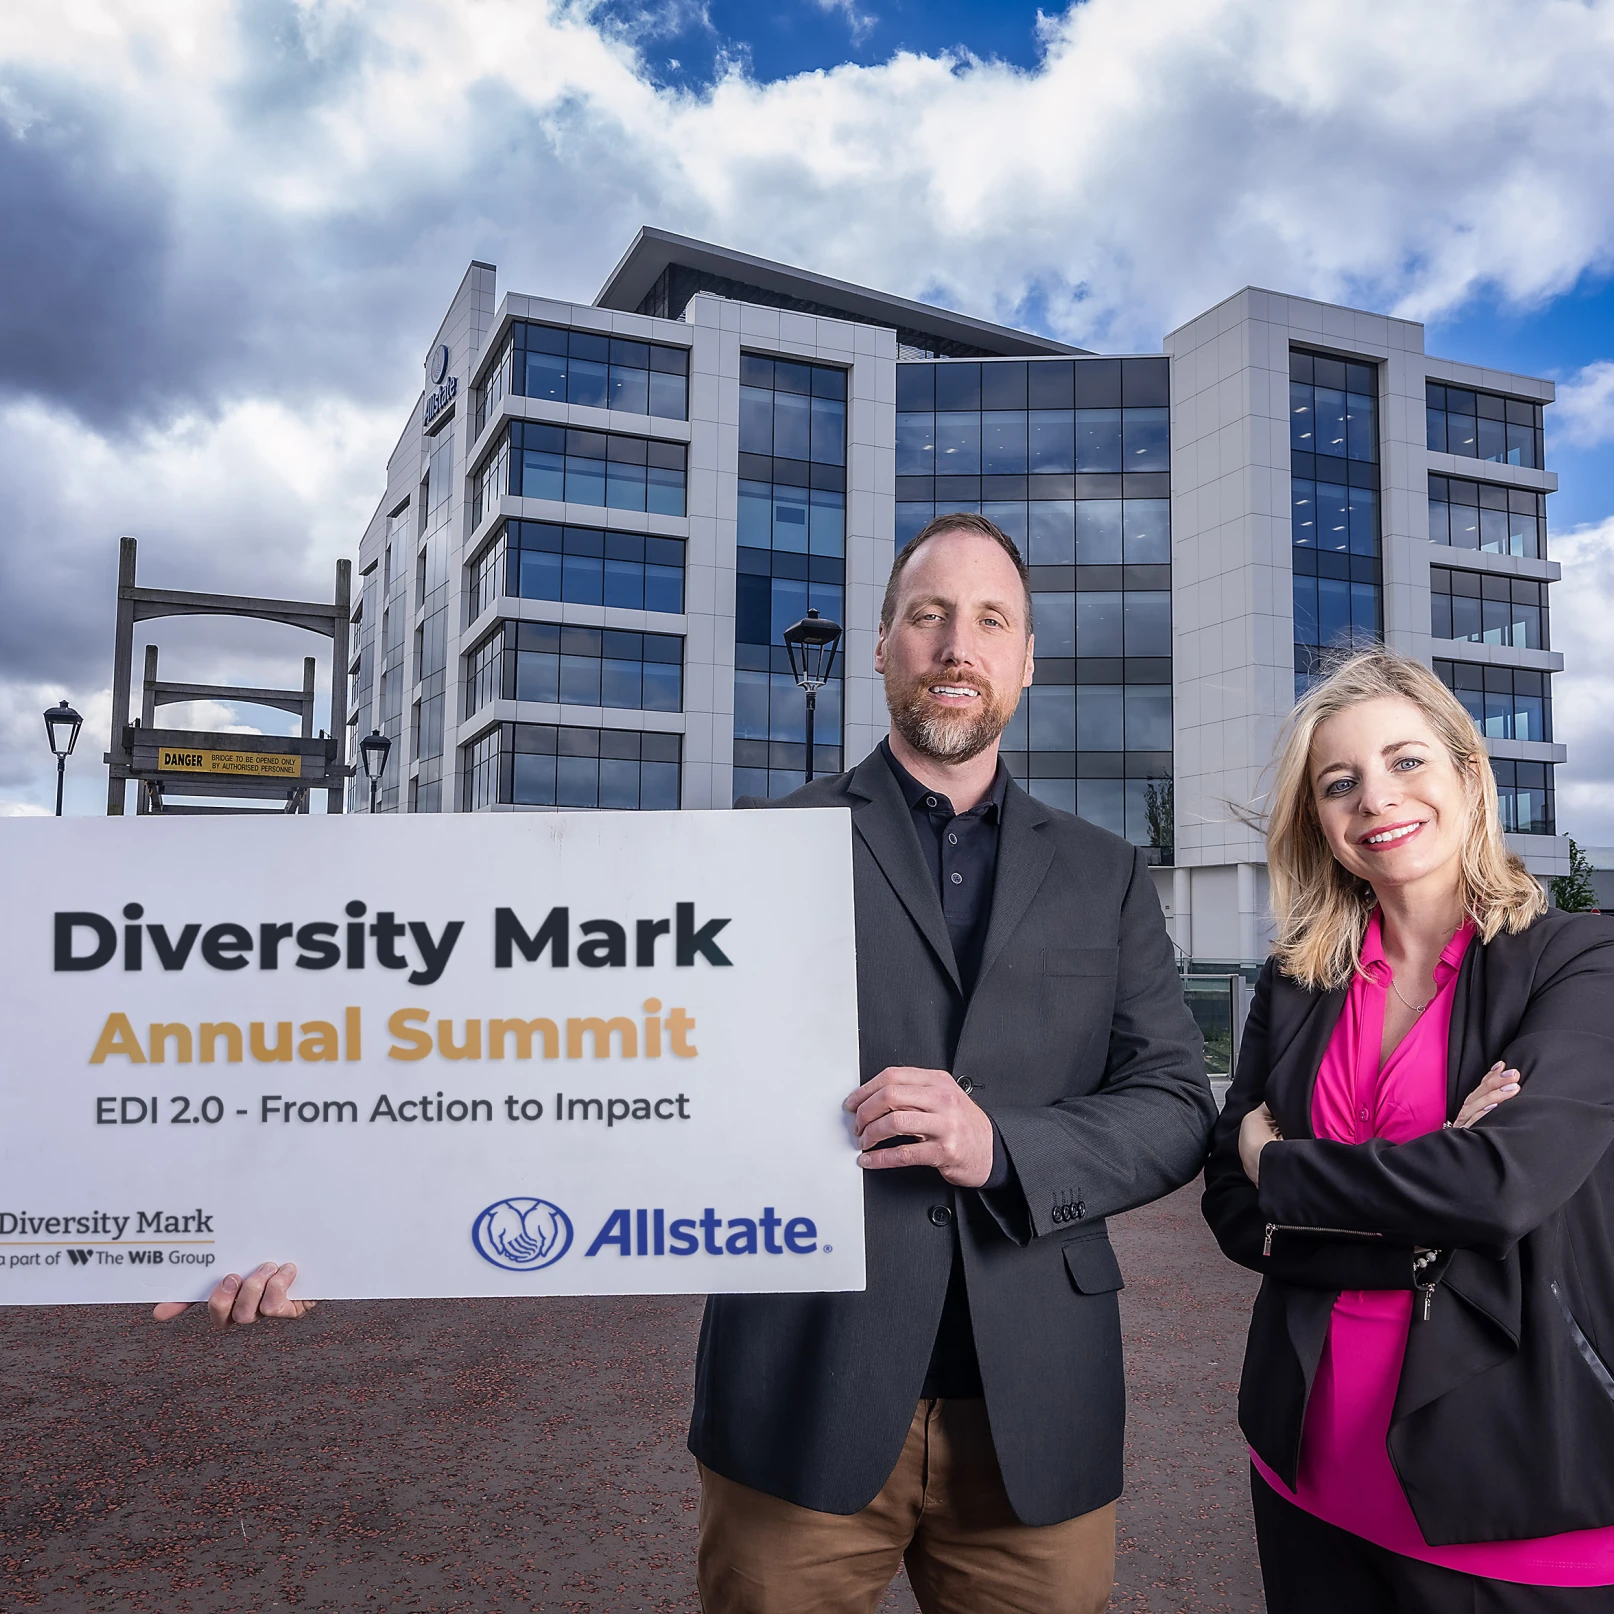 Diversity and Inclusion Summit Planned for Belfast this Autumn